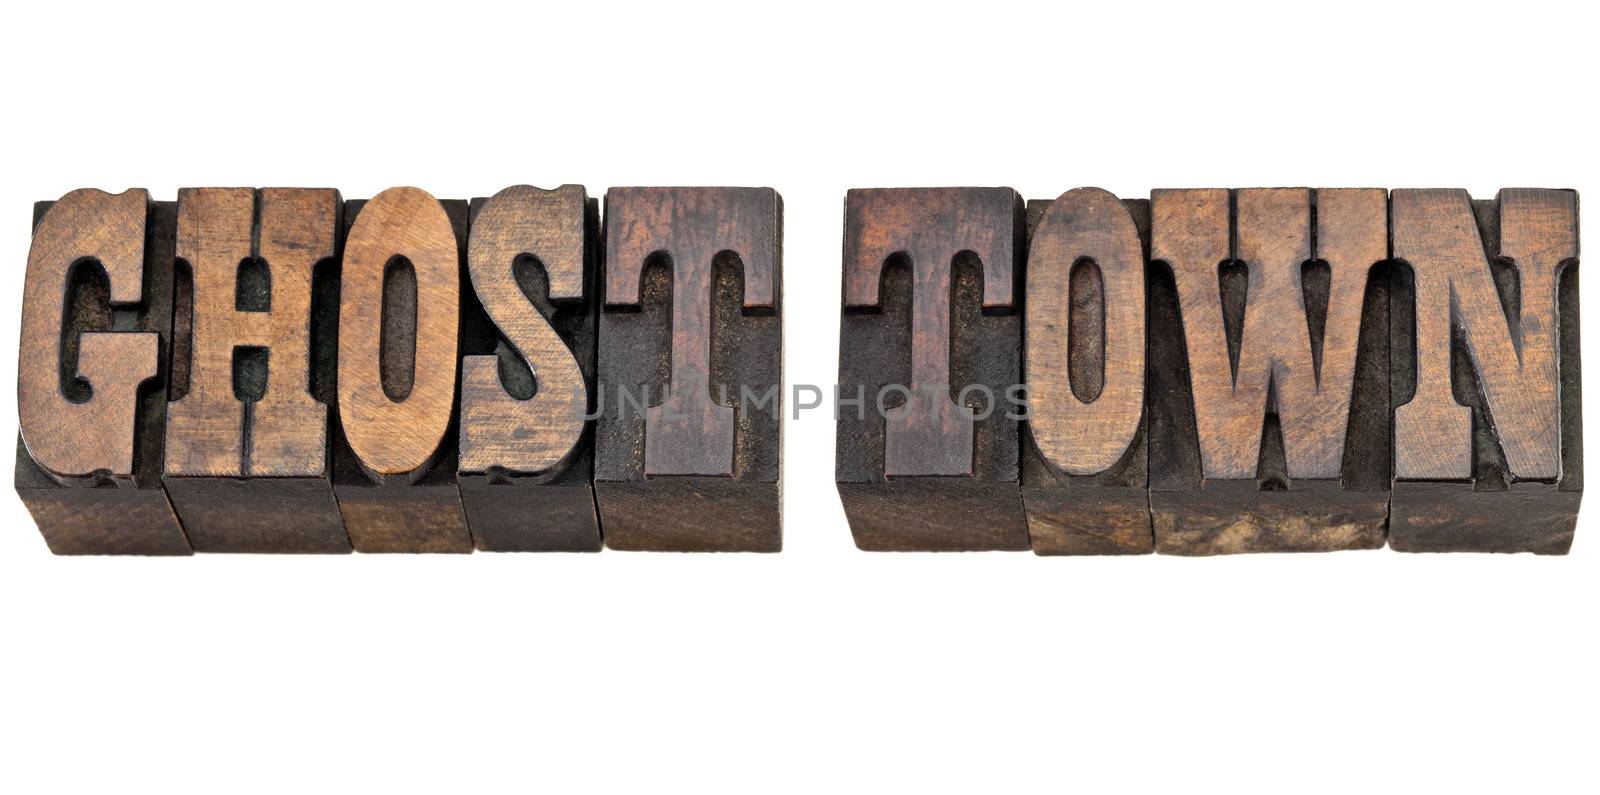 ghost town - isolated phrase in vintage letterpress wood type, French Clarendon font popular in western movies and memorabilia